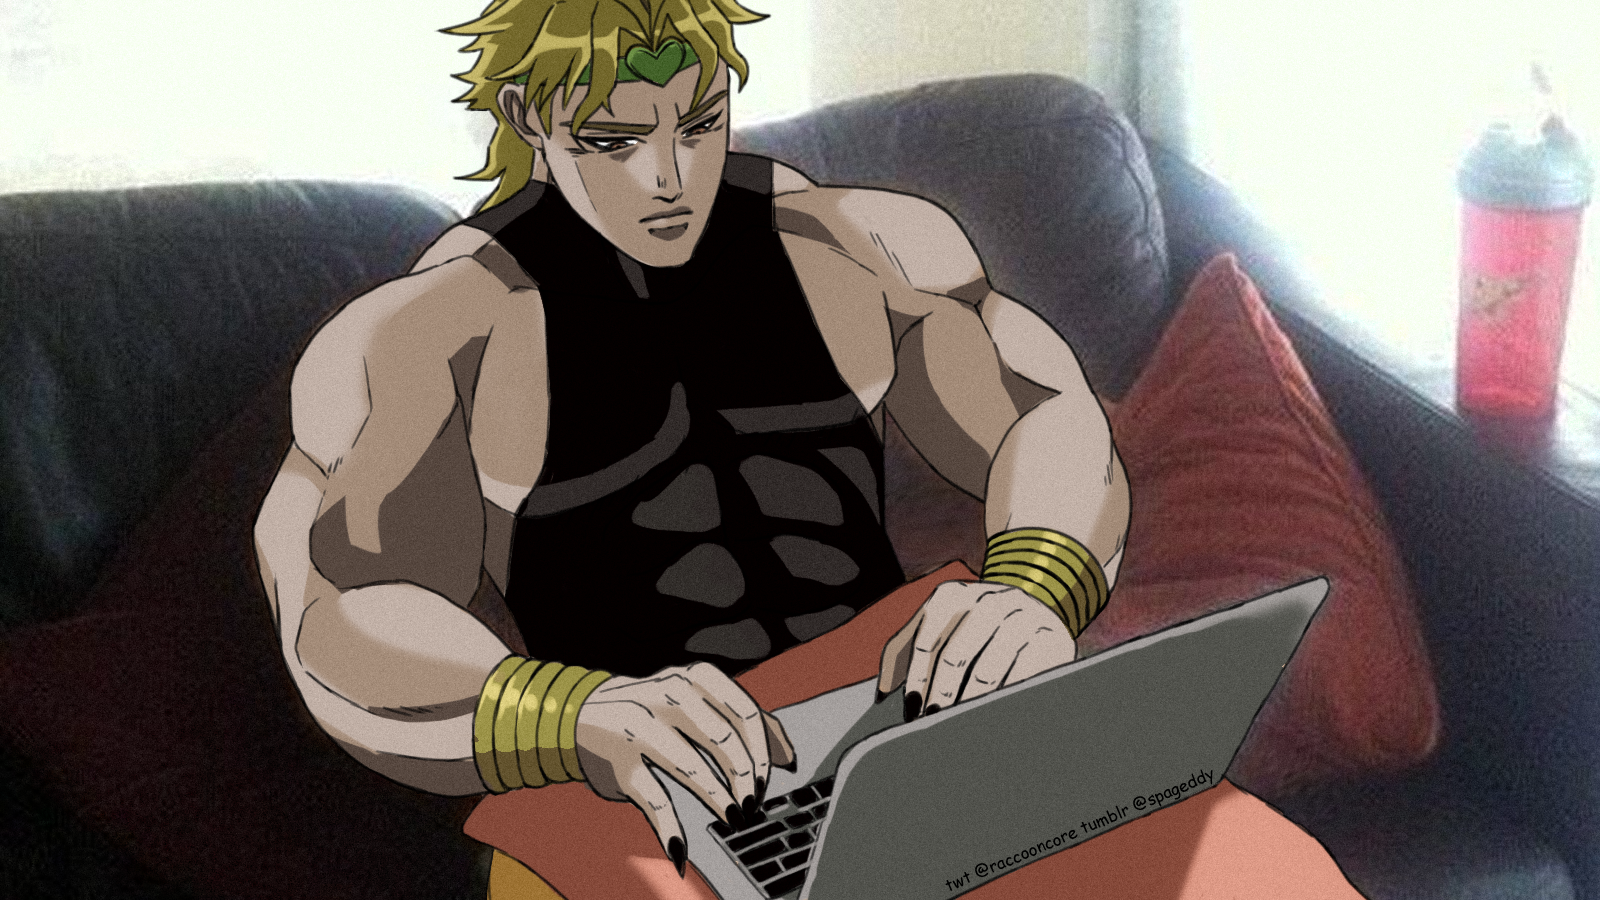 dio uses the computer.